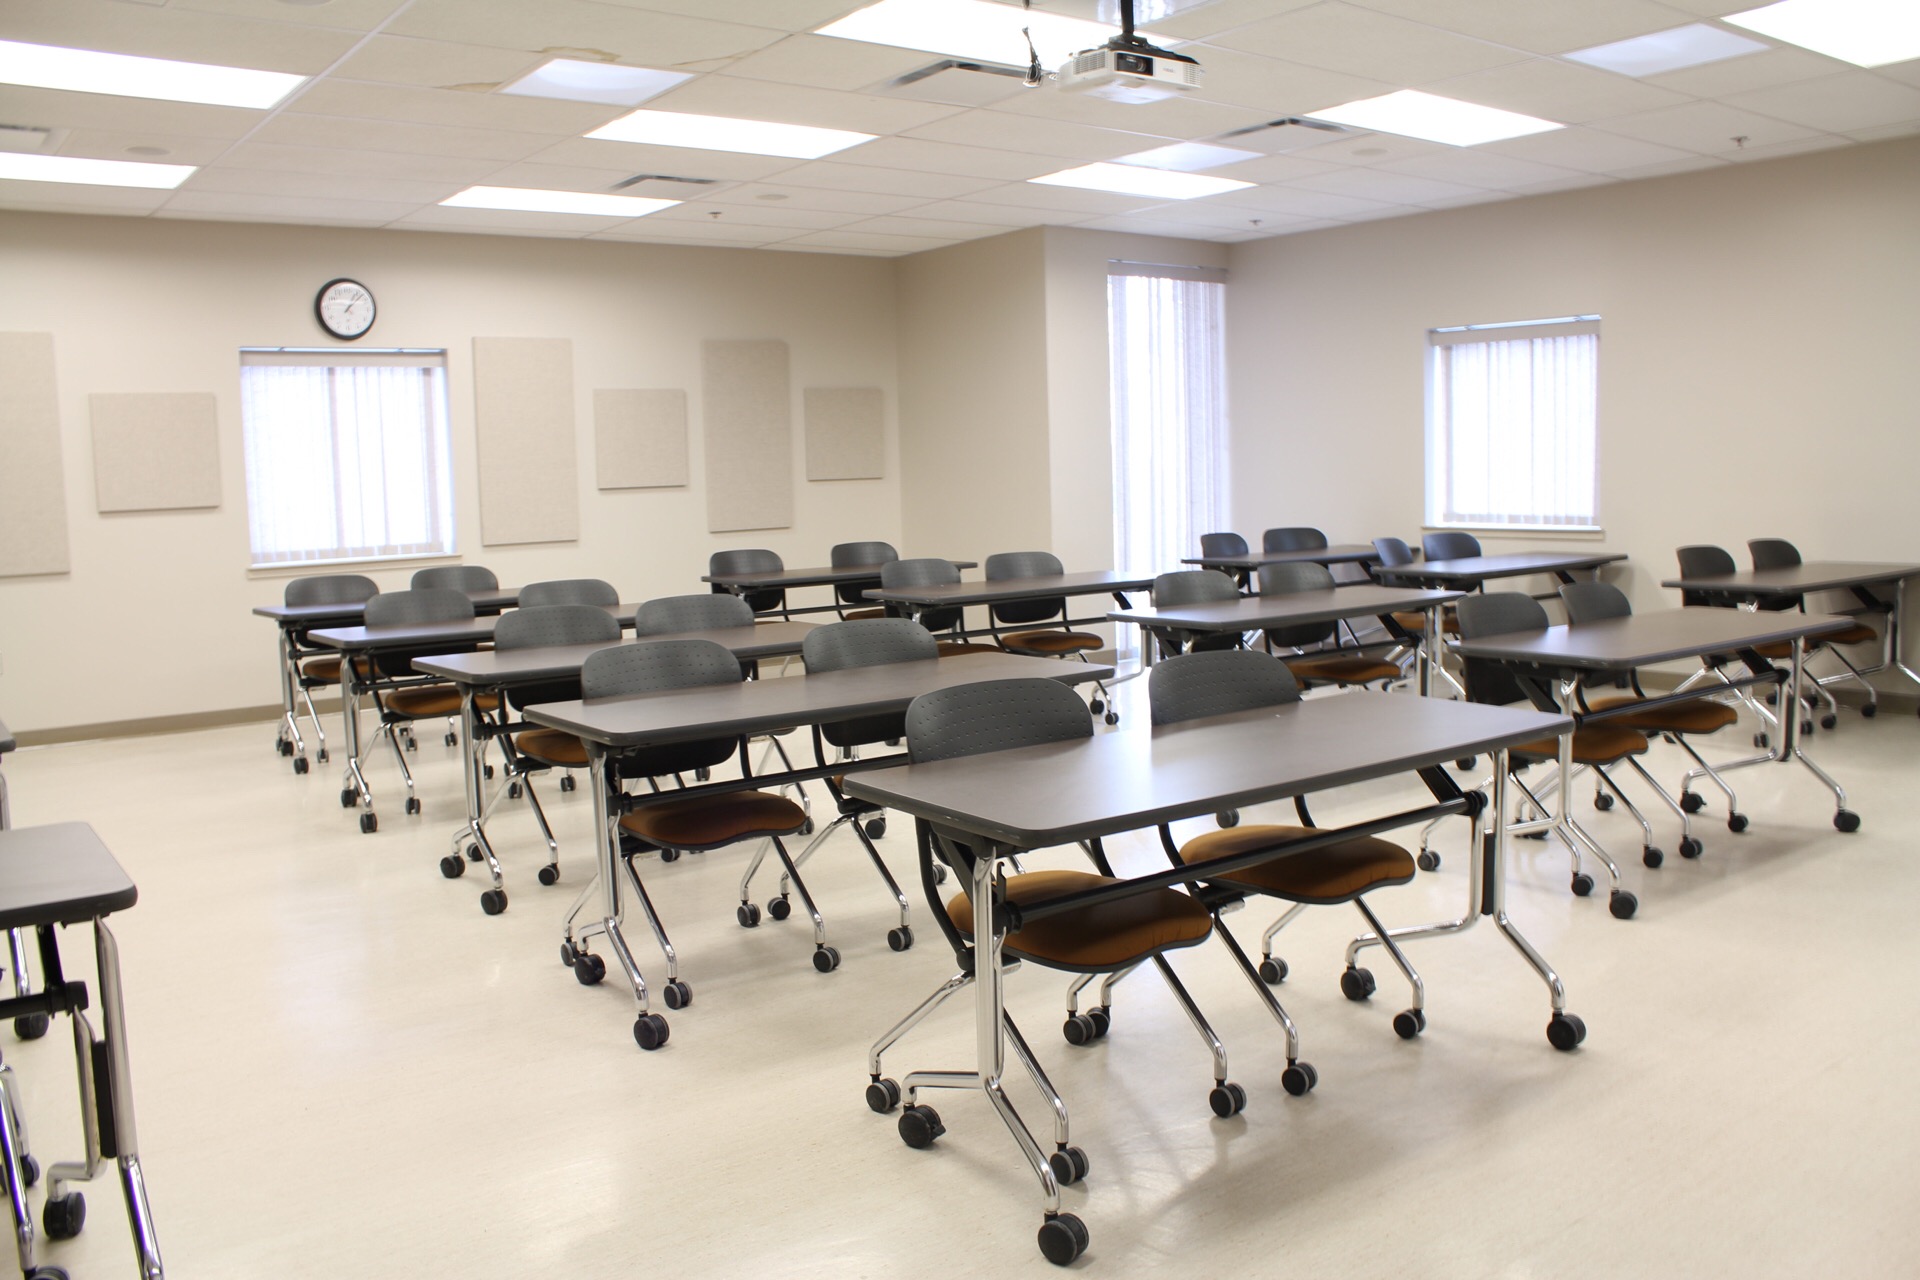 Classroom from front showing movable tables and chairs